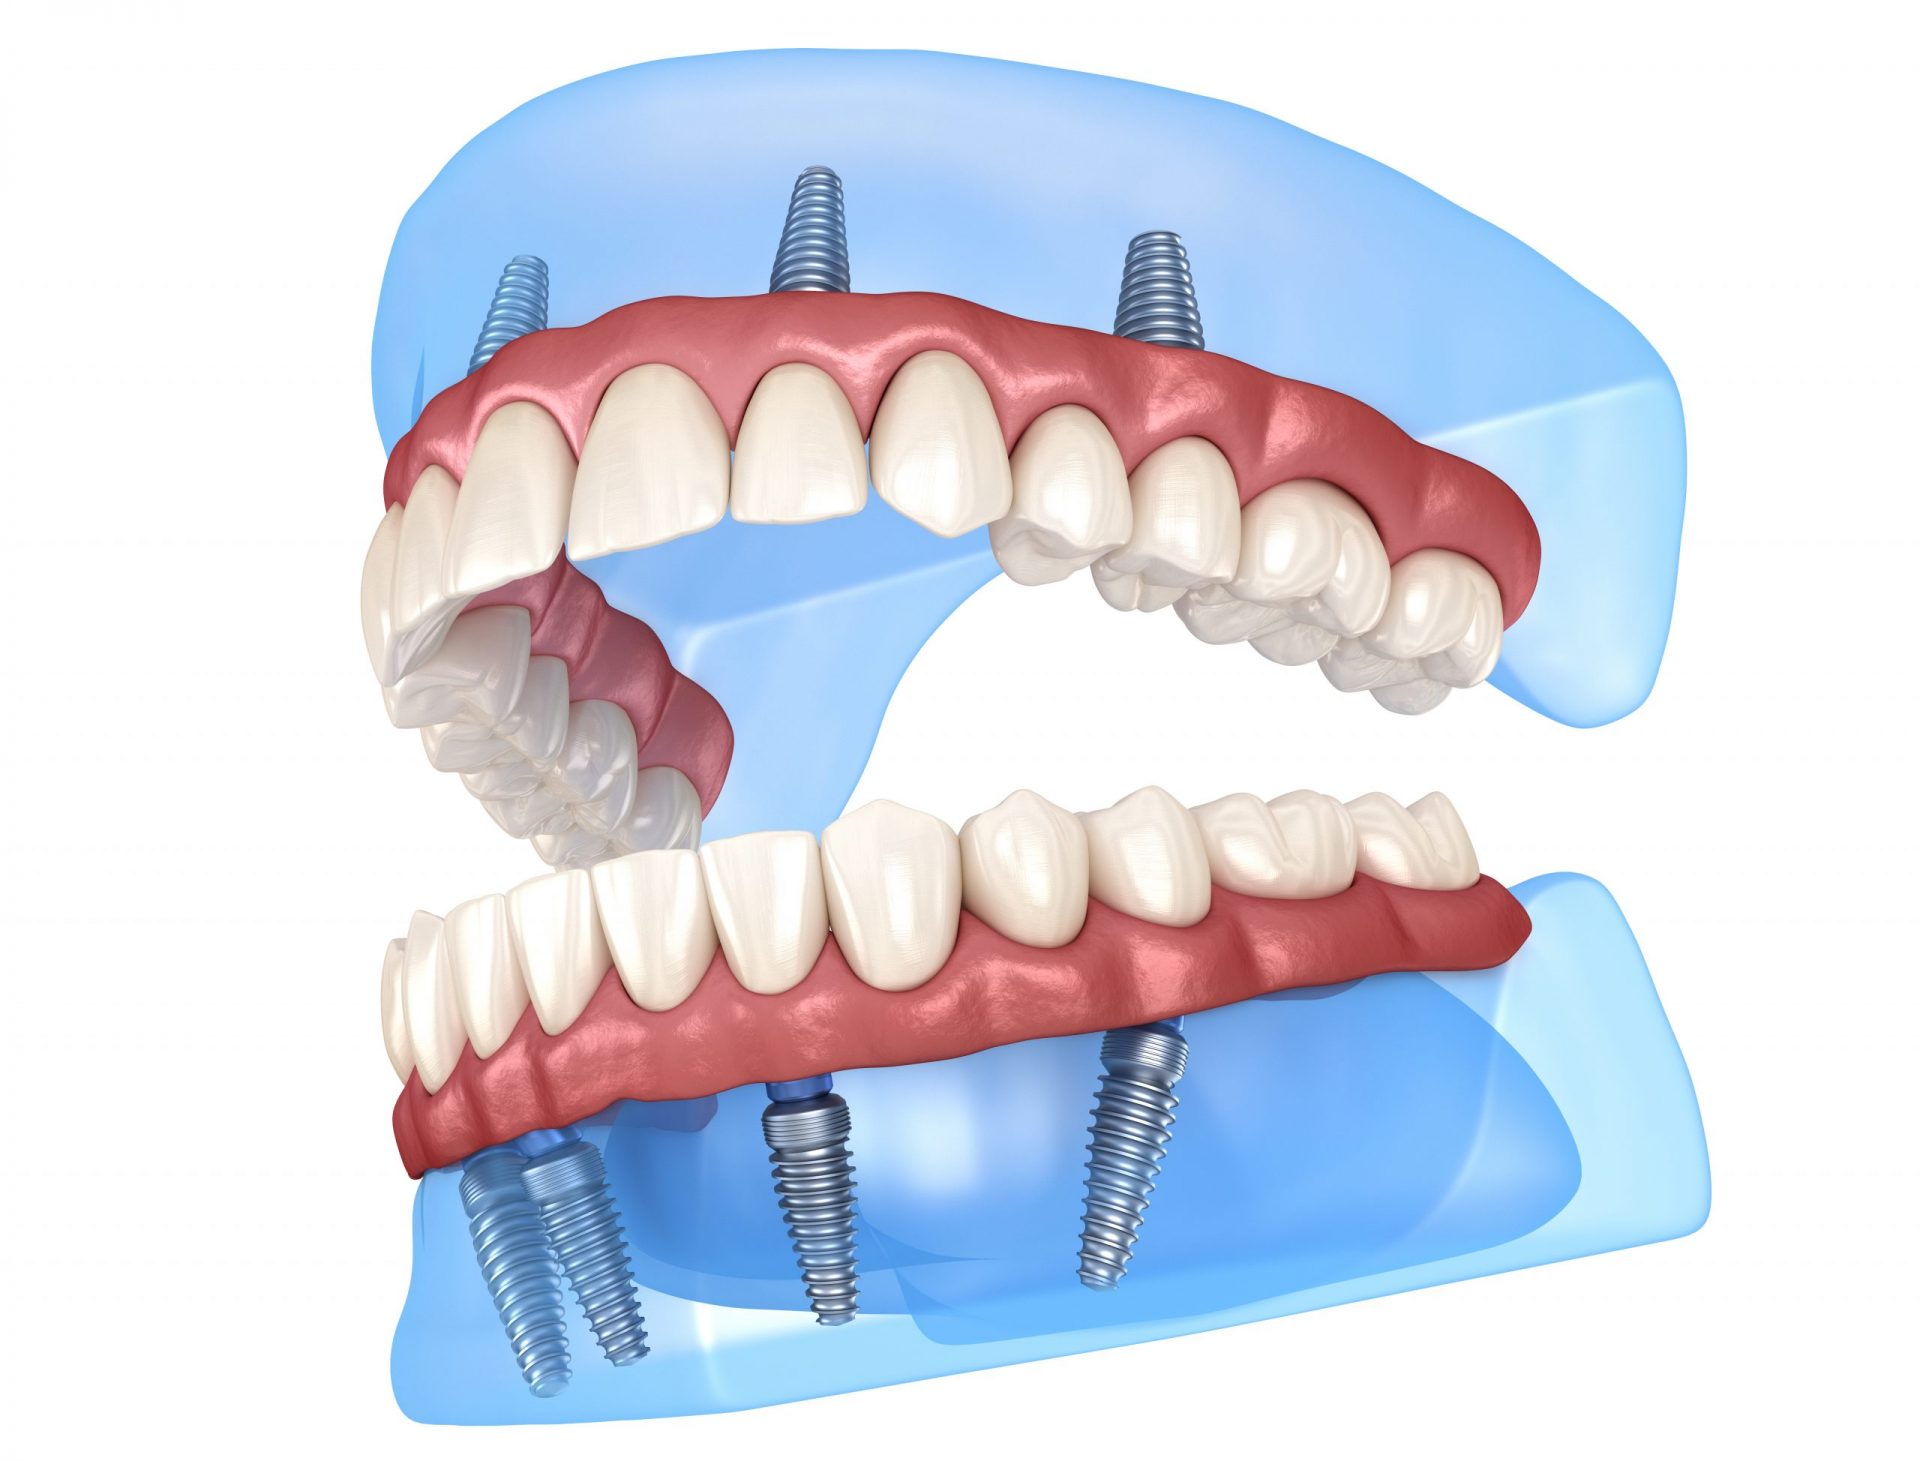 All-On-4 teeth in a day dental implants 3D rendering.